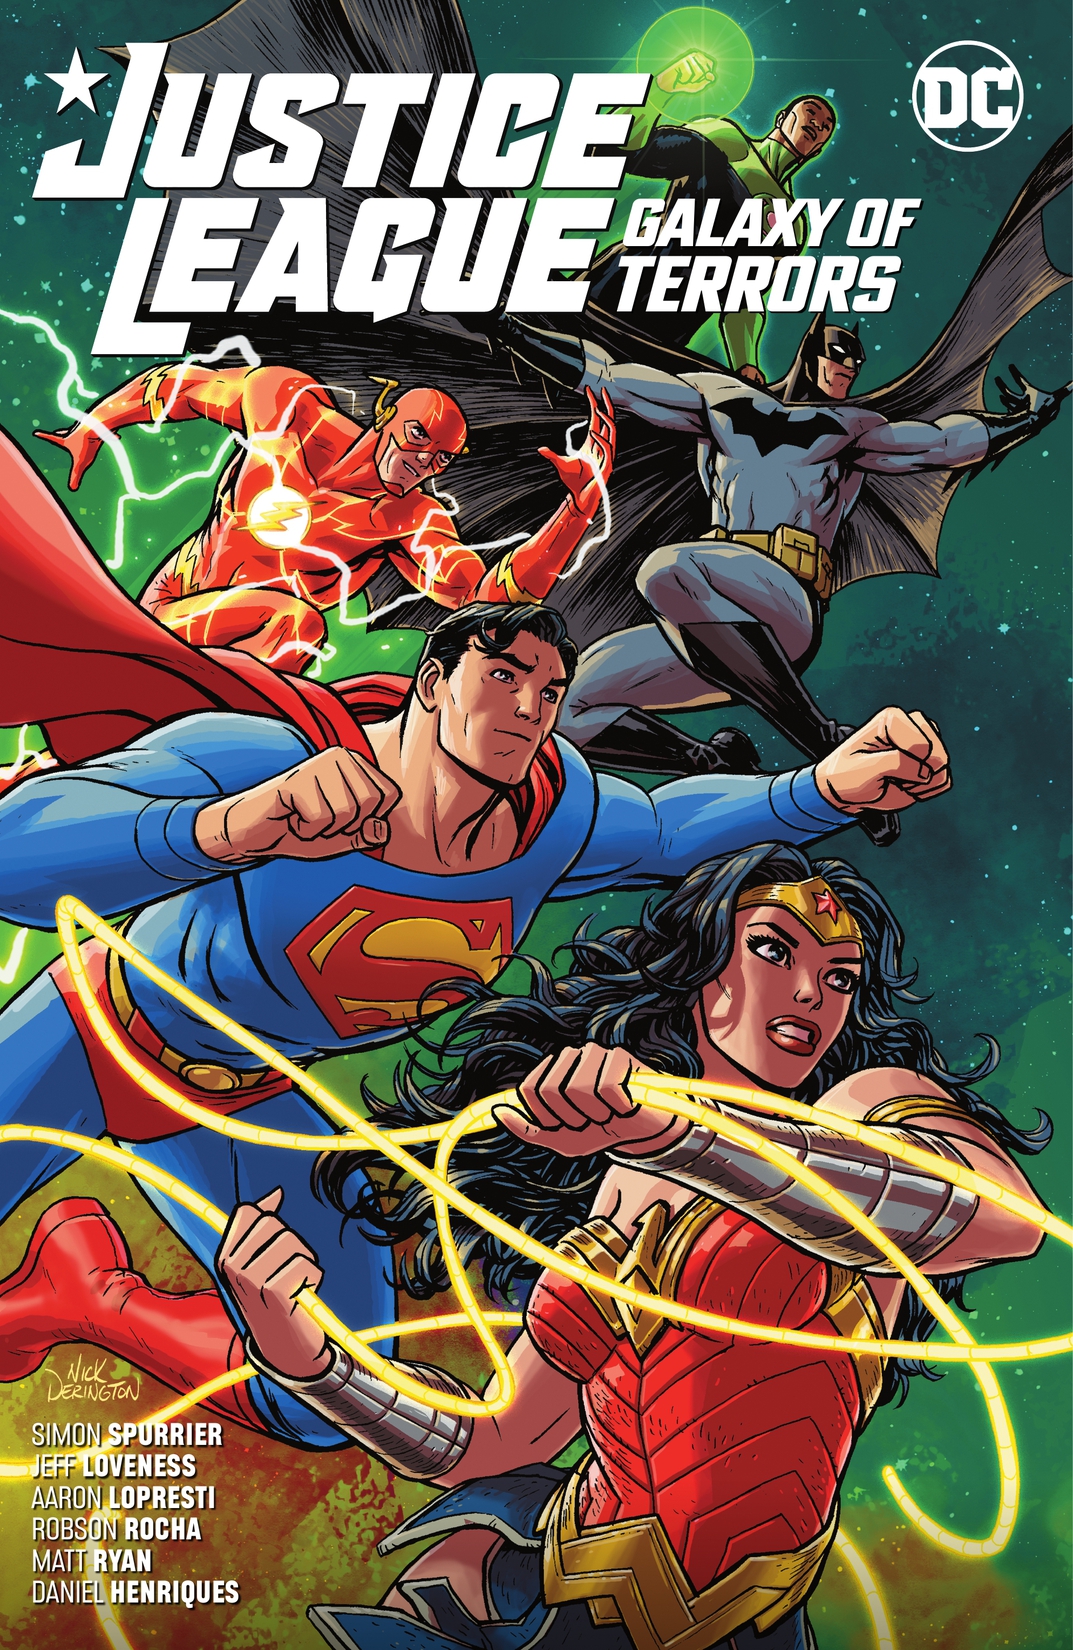 Justice League: Galaxy of Terrors preview images